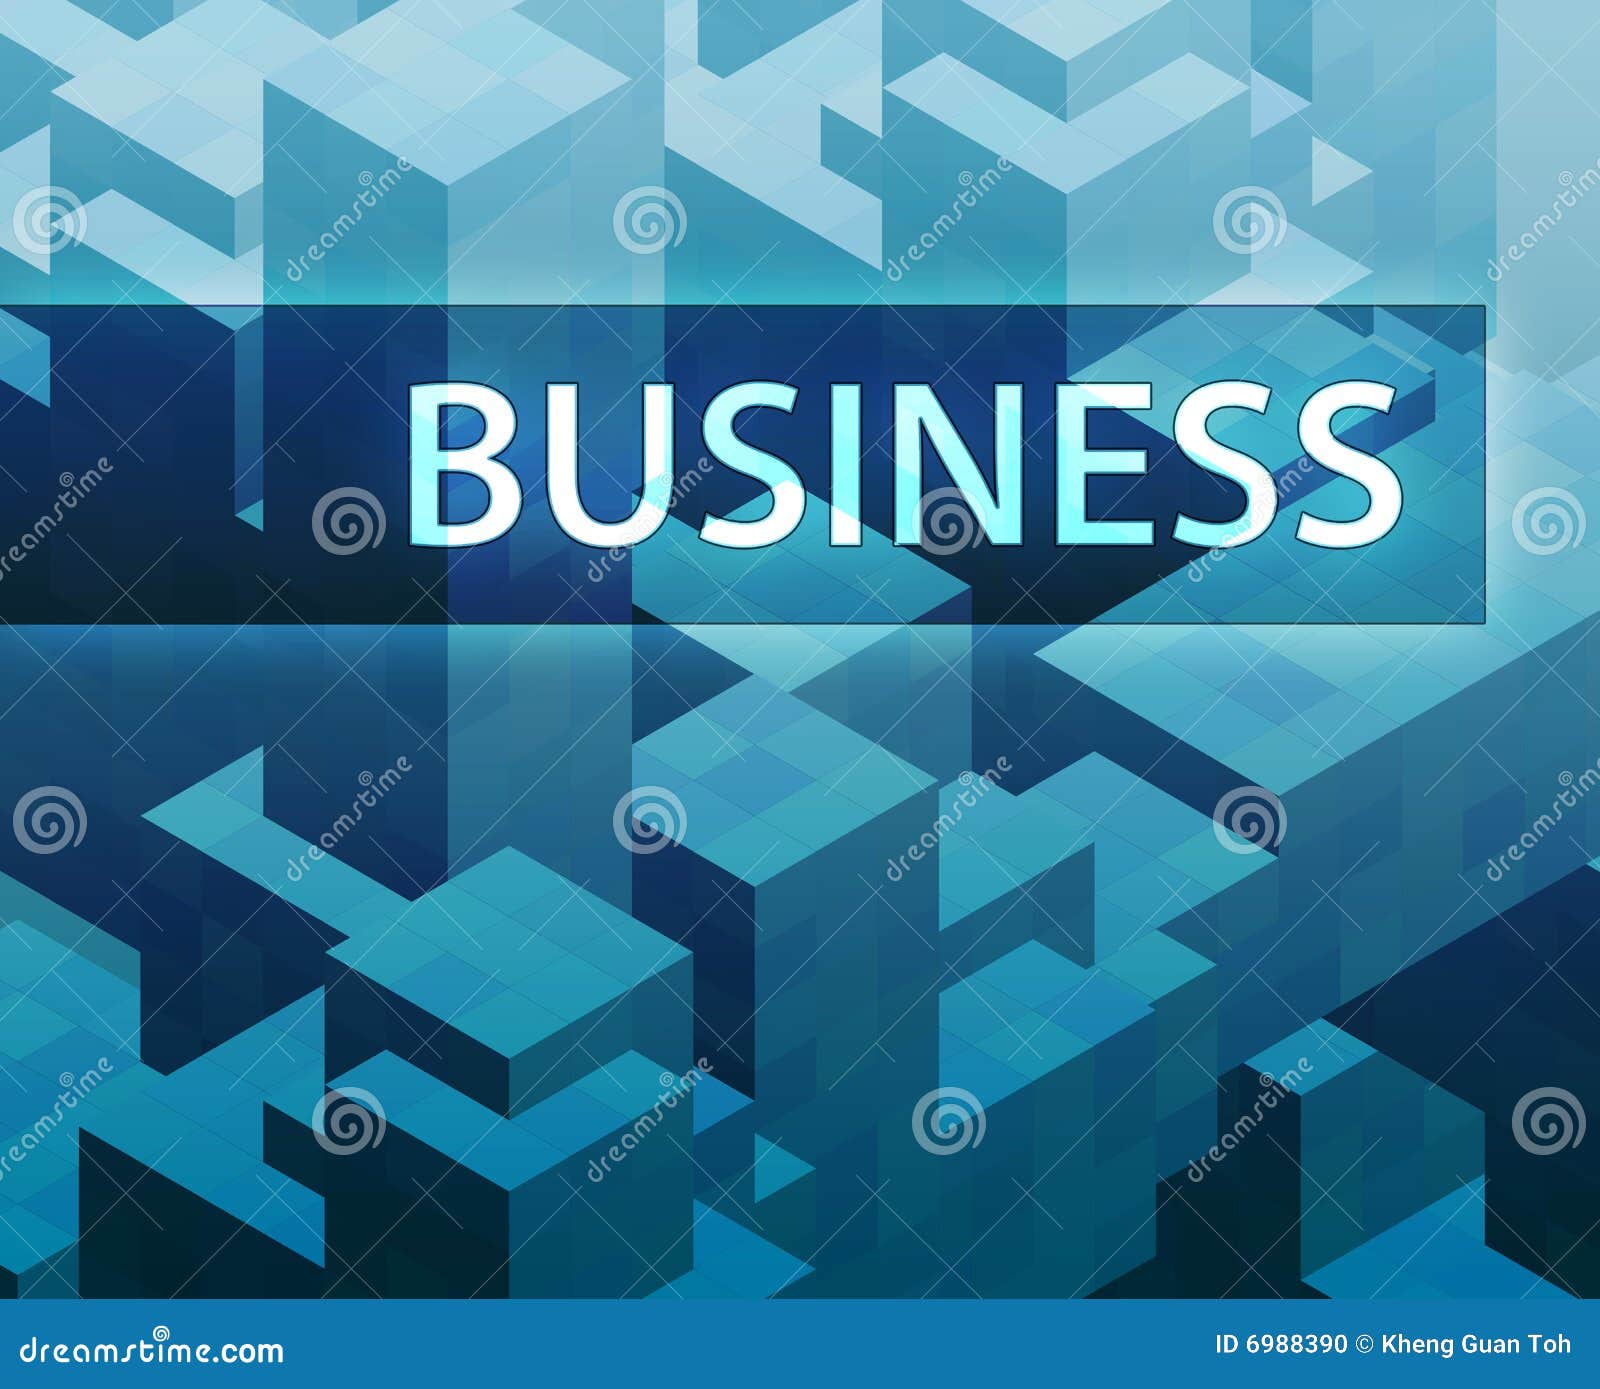 business strategy clipart - photo #42